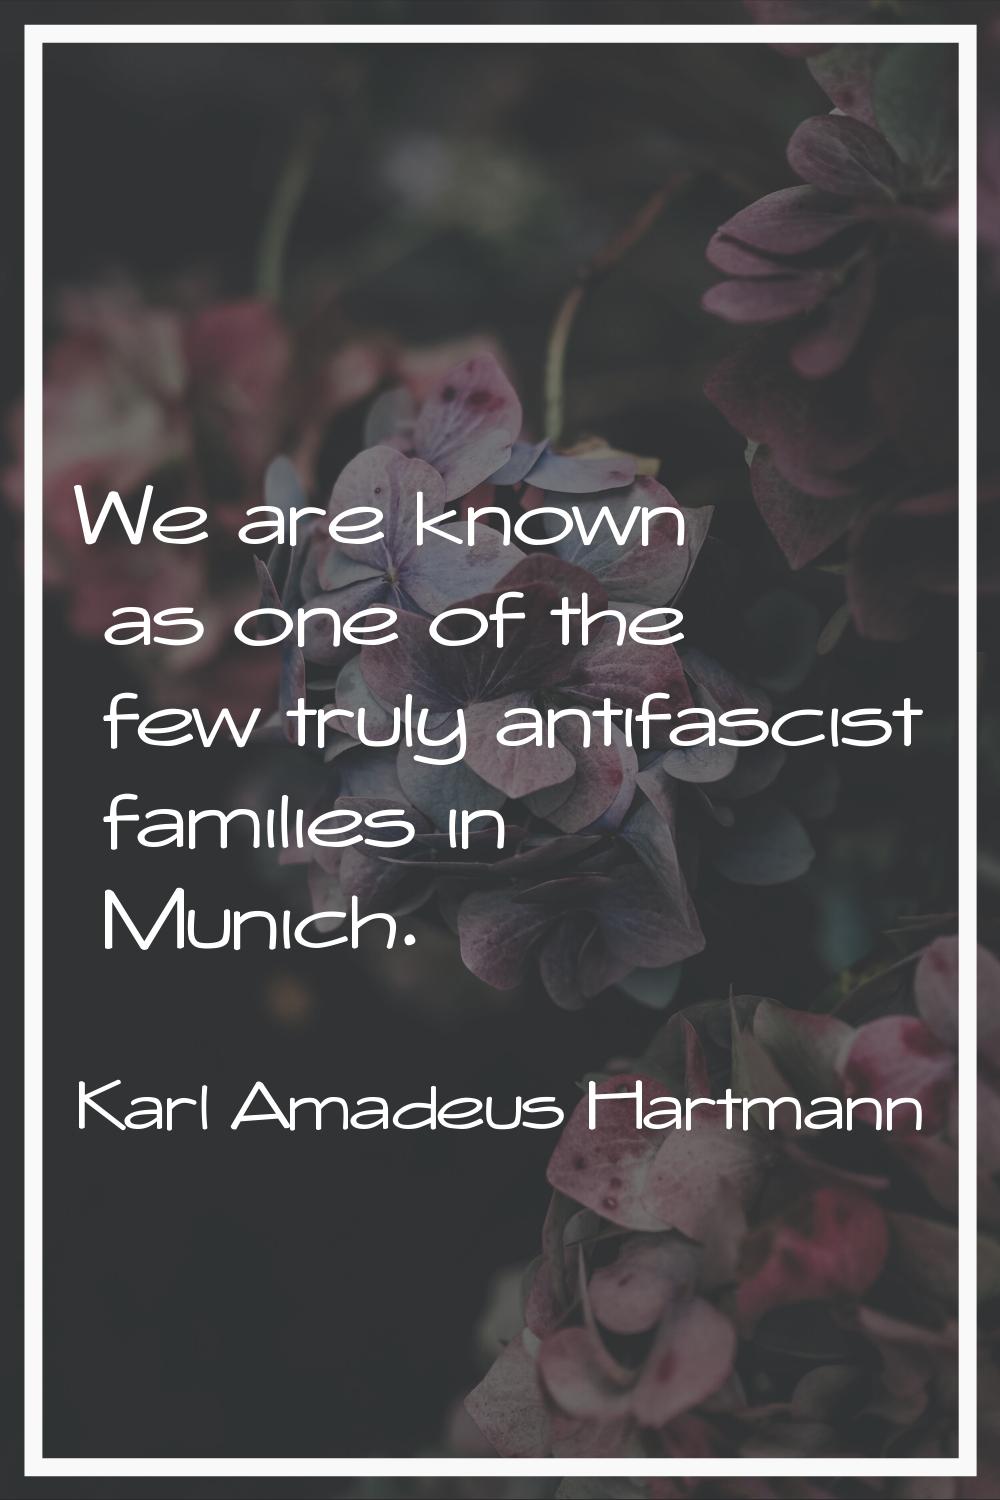 We are known as one of the few truly antifascist families in Munich.